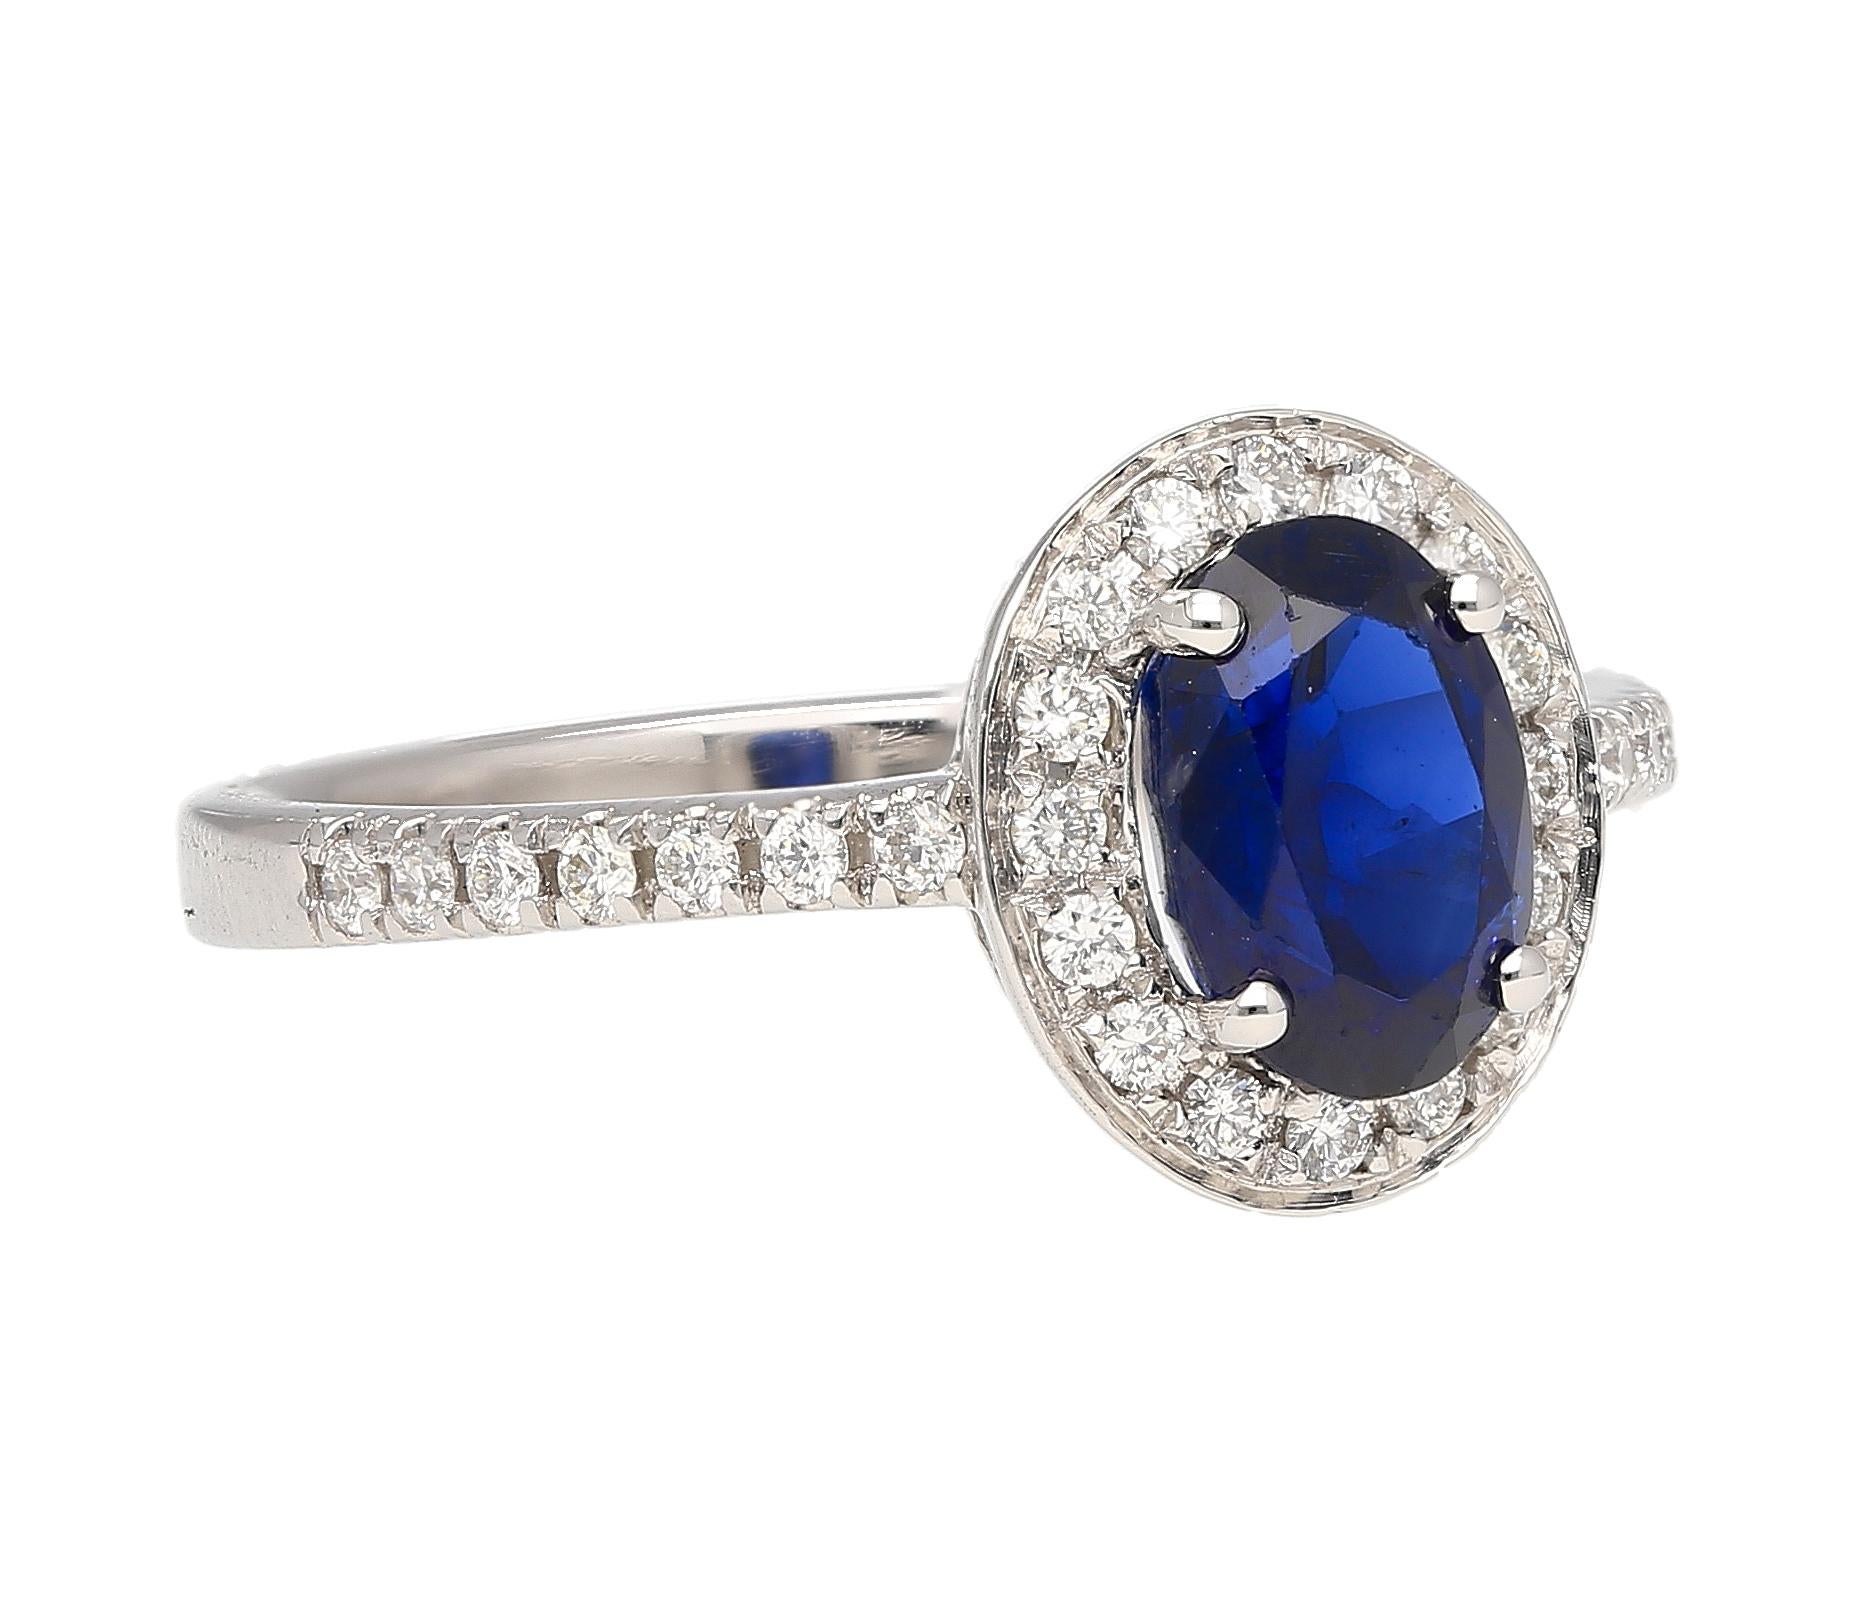 Natural Blue Sapphire and White Diamond Halo Ring in 18k White Gold. Featuring a thin shank, eye clean diamonds, and a low profile/elevation that sits beautifully on the finger during wear. The gemstones are all natural and set in 18k solid gold.